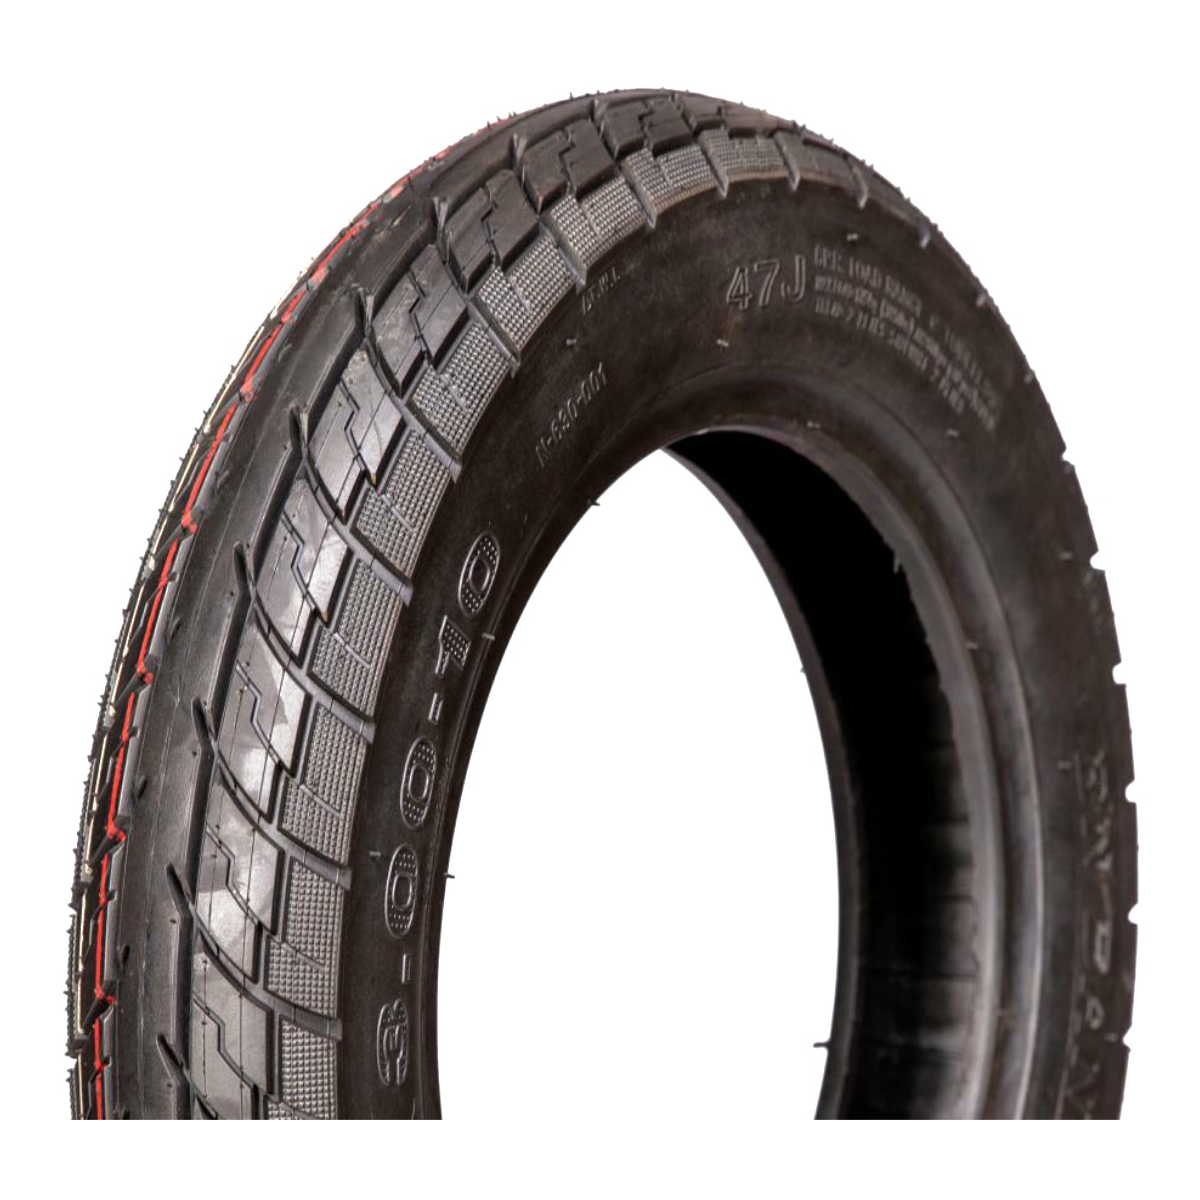 14*2.50 Electric Bike Tires with CCC Certification